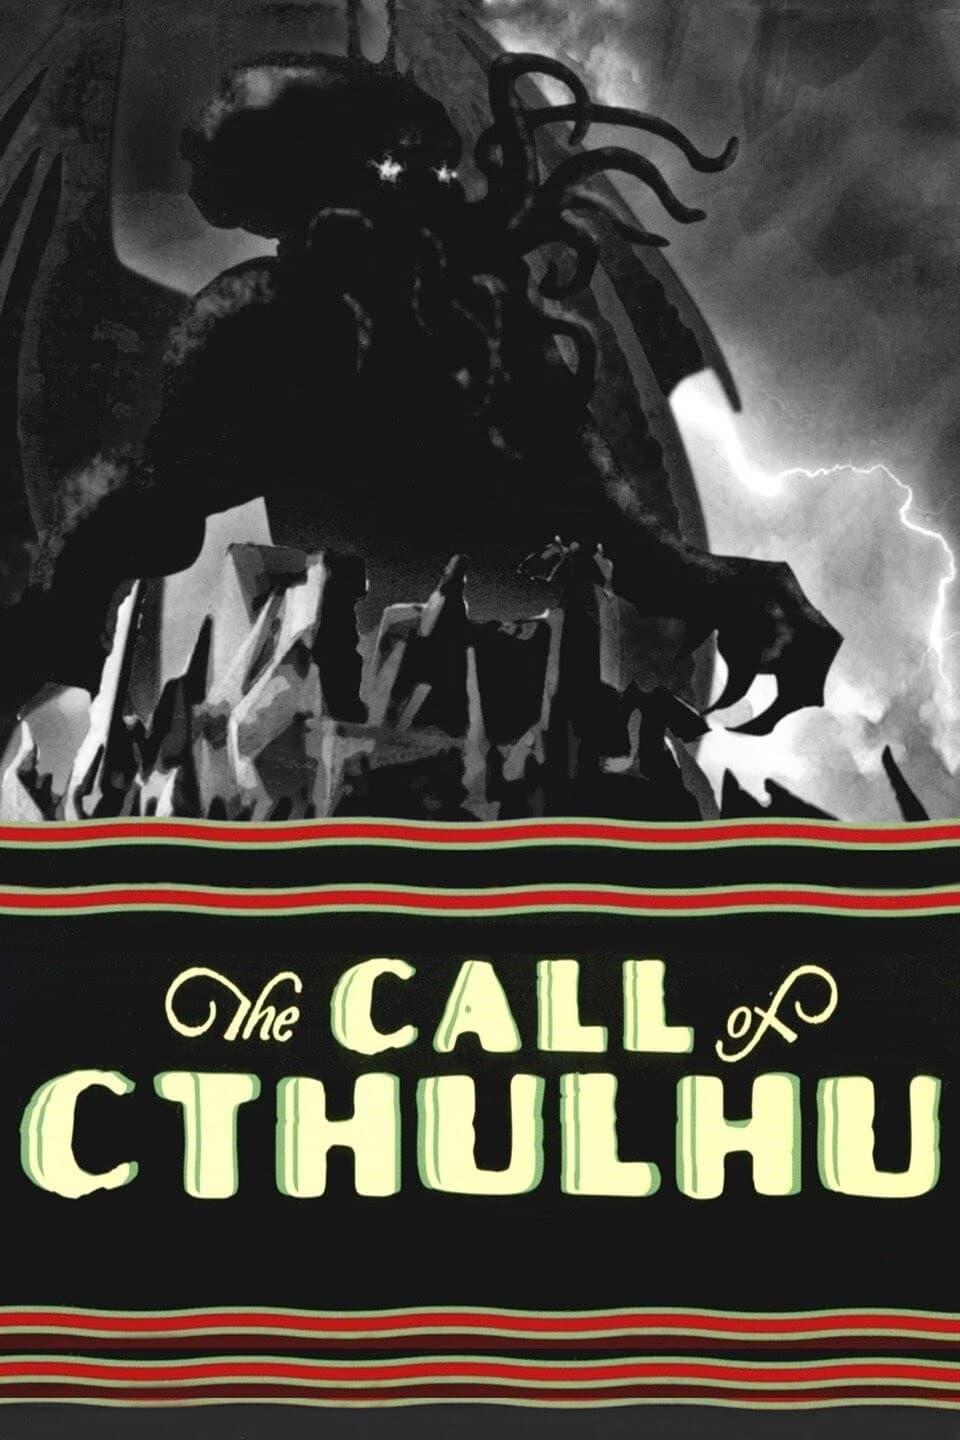 The Call of Cthulhu poster